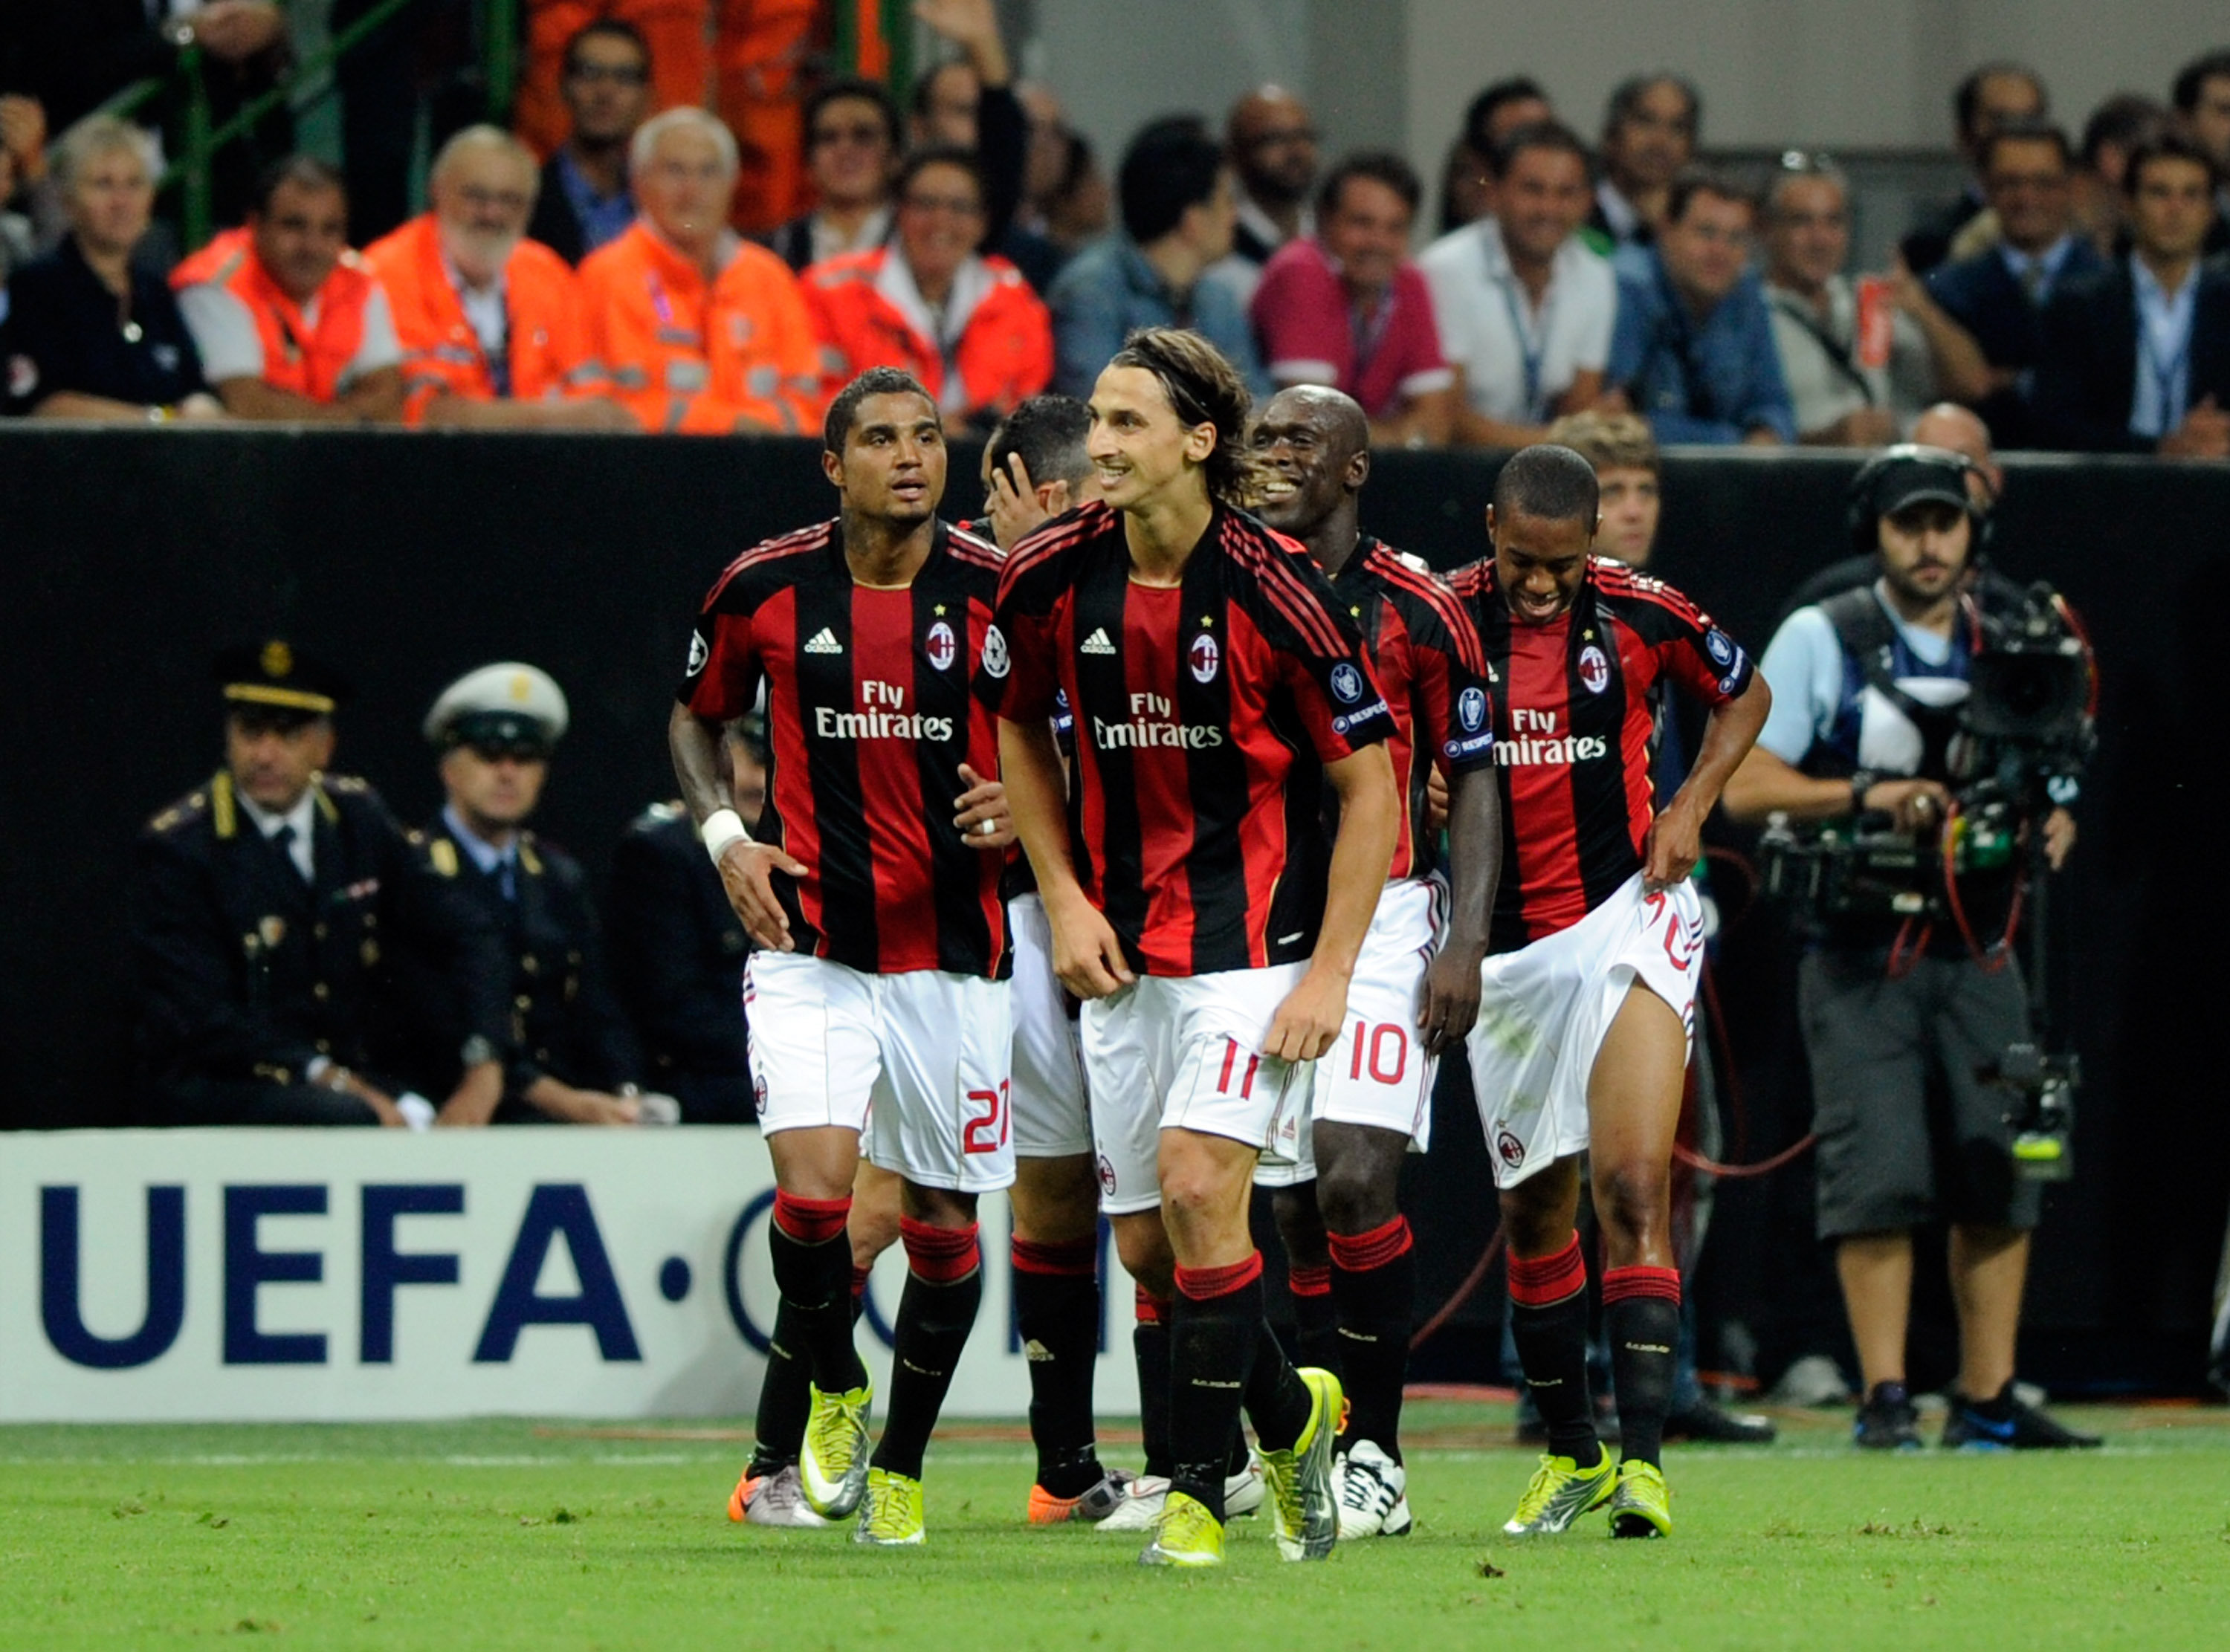 MILAN, ITALY - SEPTEMBER 15: Celebrates of Zlatan Ibrahimovic of AC Milan after the first goal during the UEFA Champions League group G match between AC Milan and Auxerre at San Siro Stadium on September 15, 2010 in Milan, Italy.  (Photo by Claudio Villa/